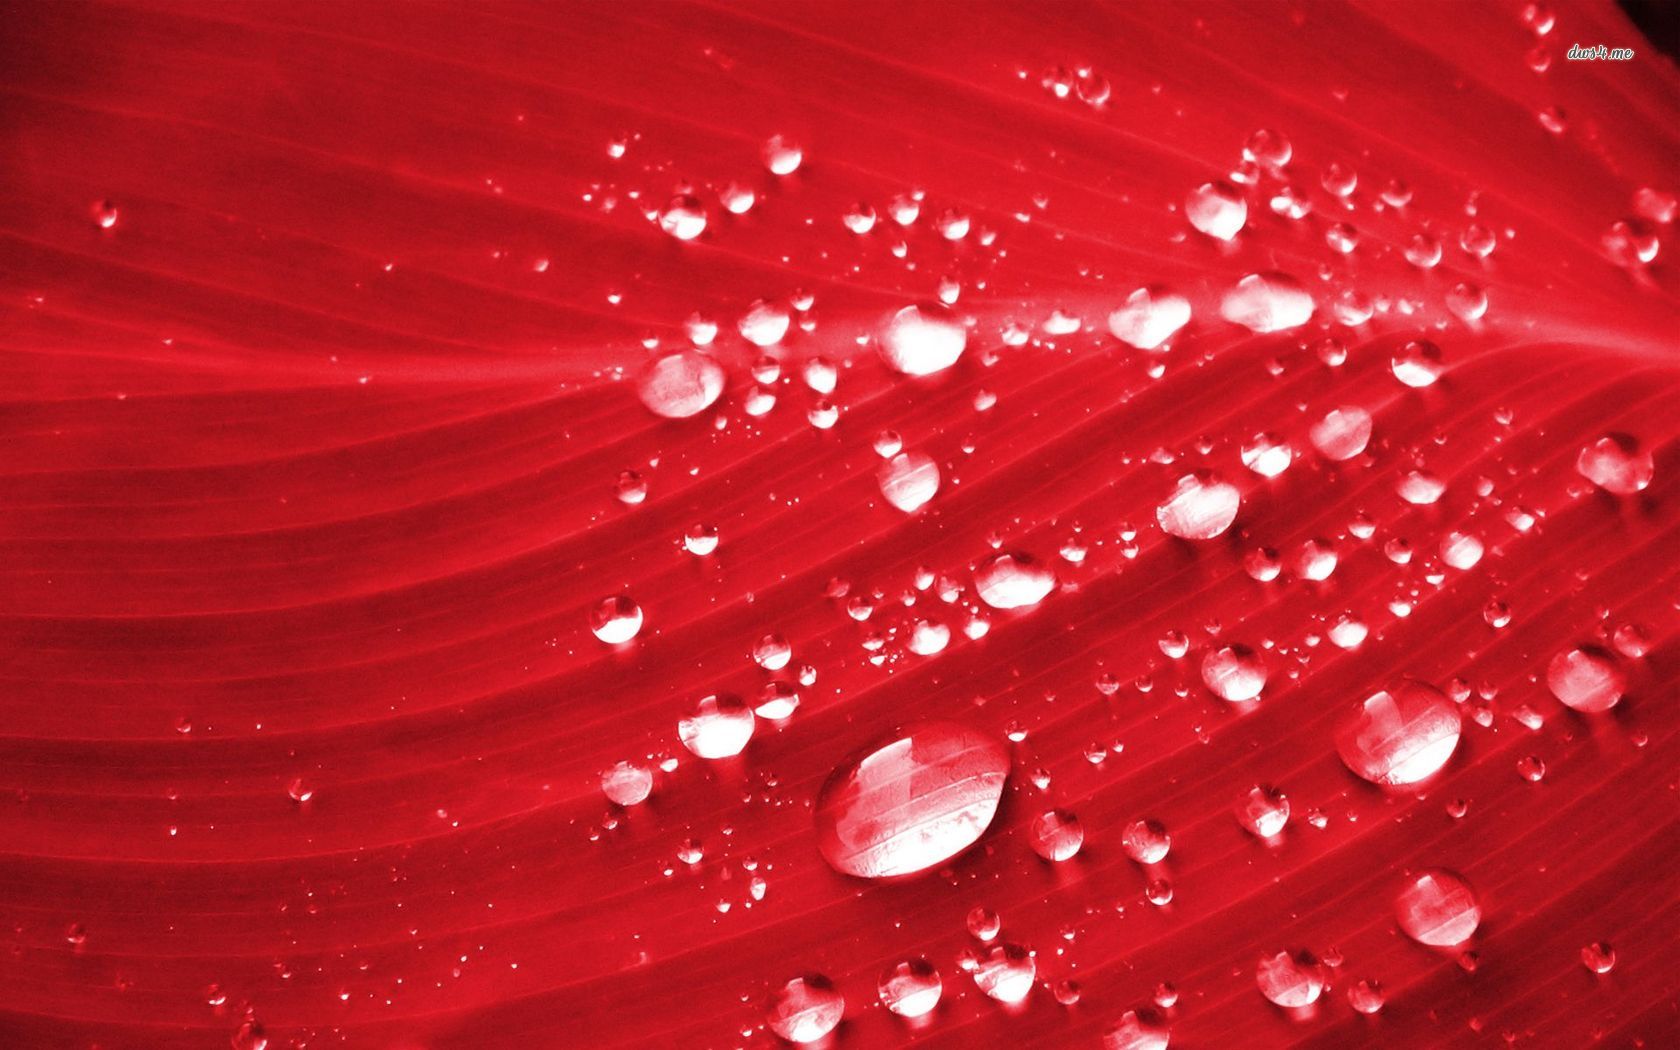 Red Leaf With Water Drop - HD Wallpaper 